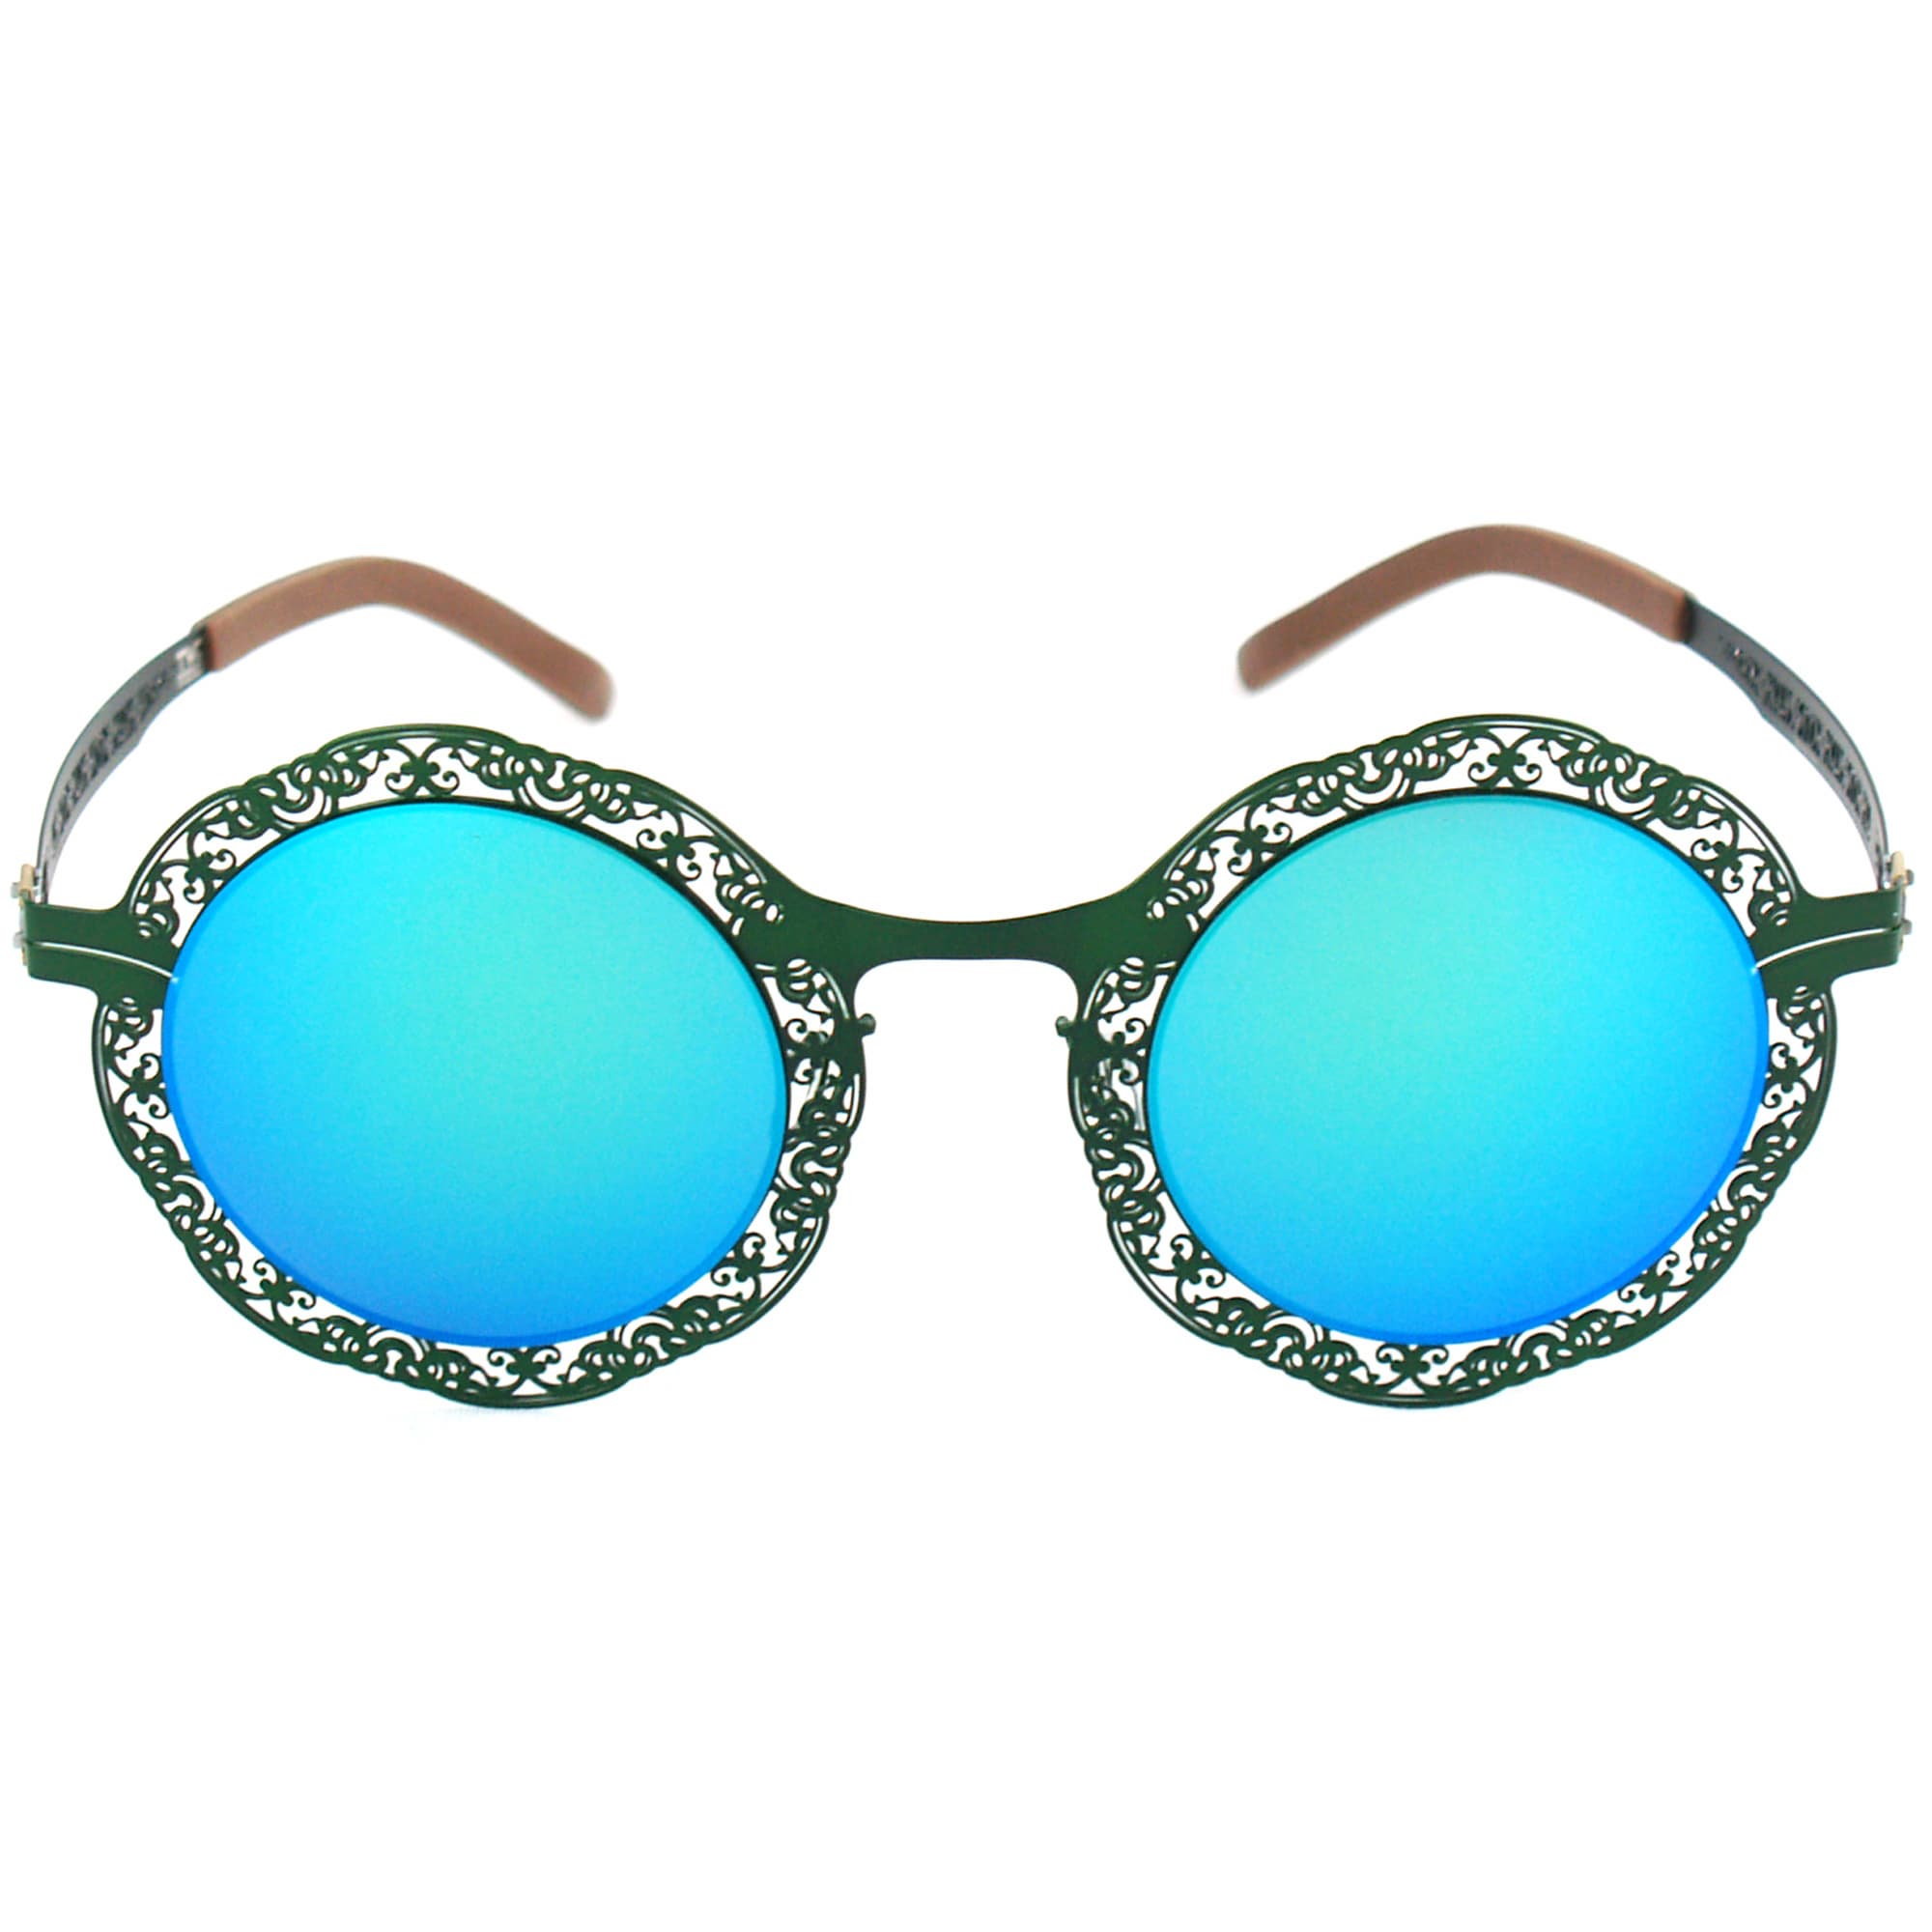 Florid Round Design Thin Stainless Steel  Frame Sunglasses